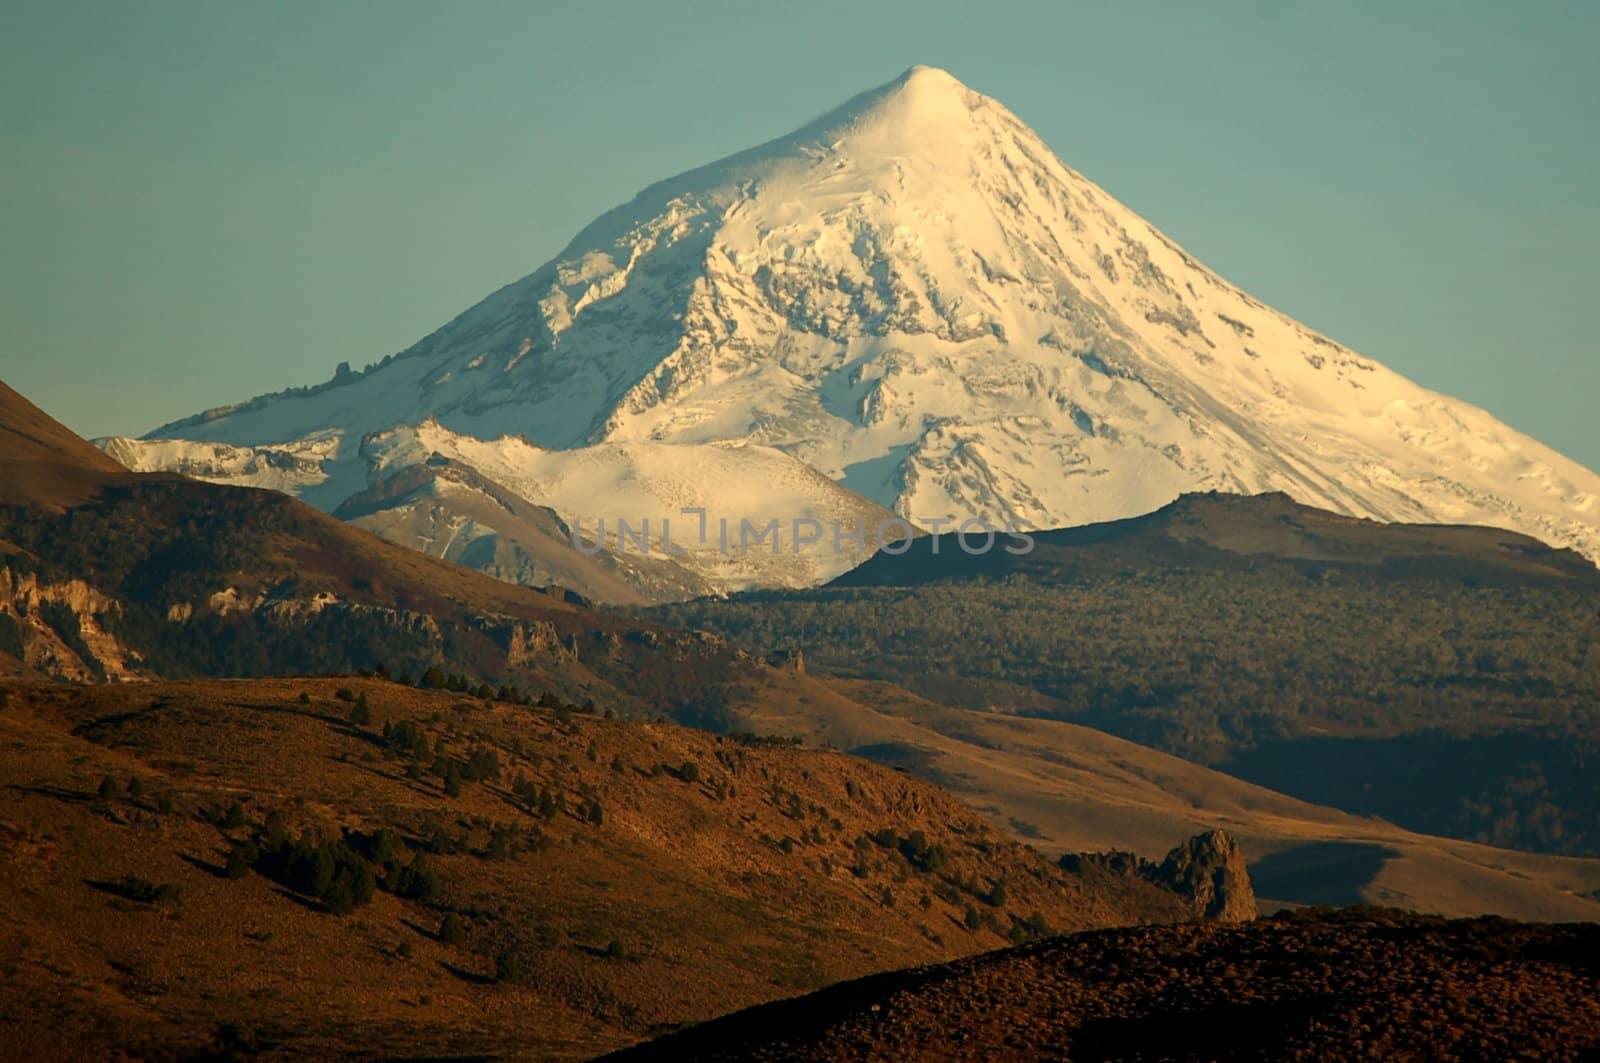 Snow covered Lanin volcano in Patagonia